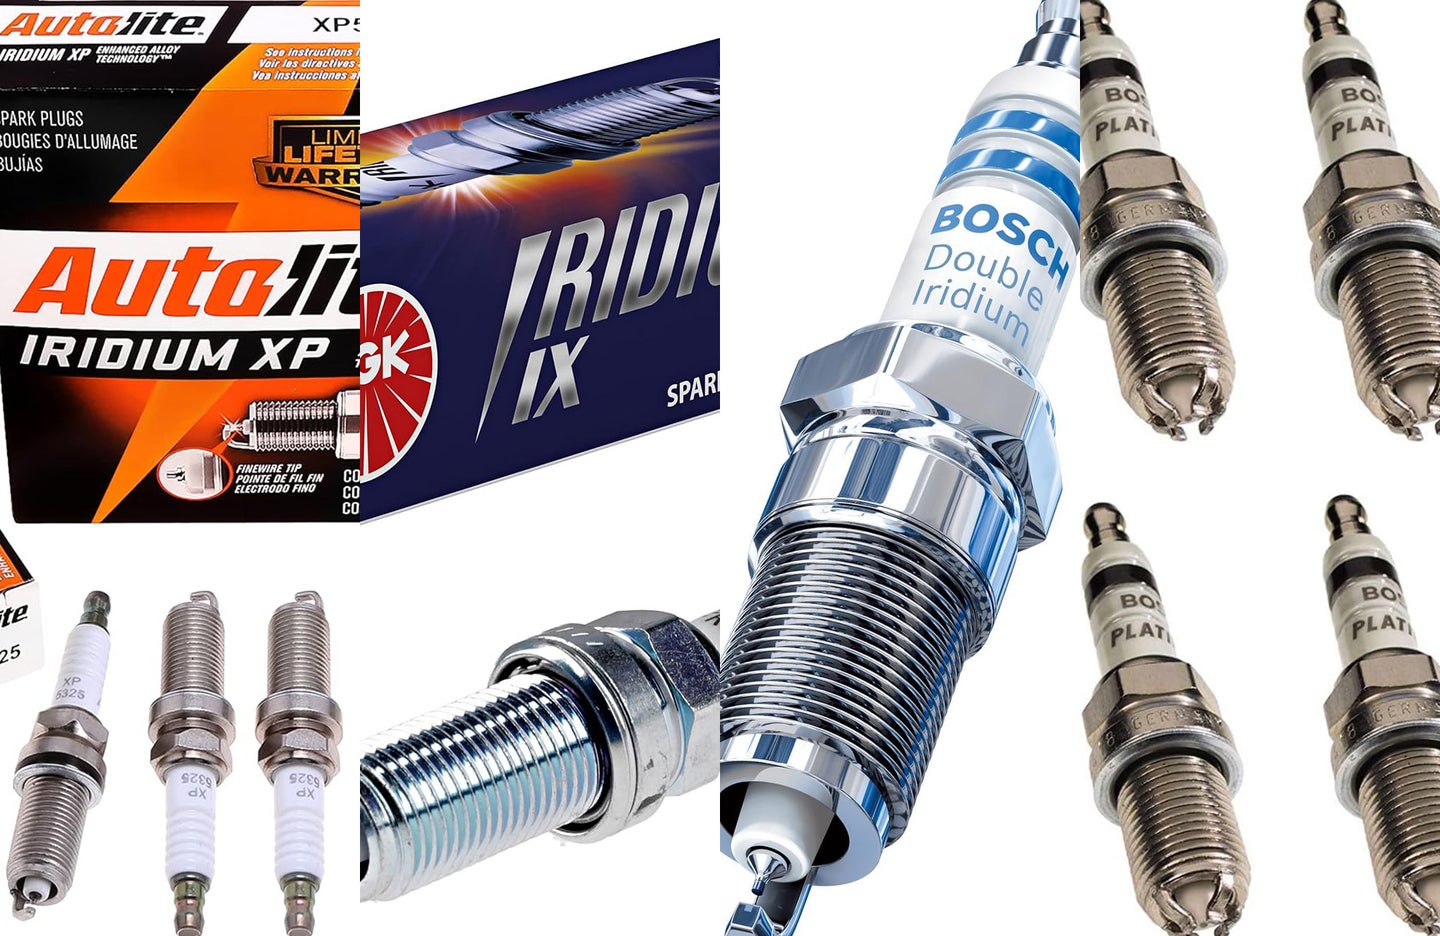 Four of the best spark plugs are sliced together against a white background.